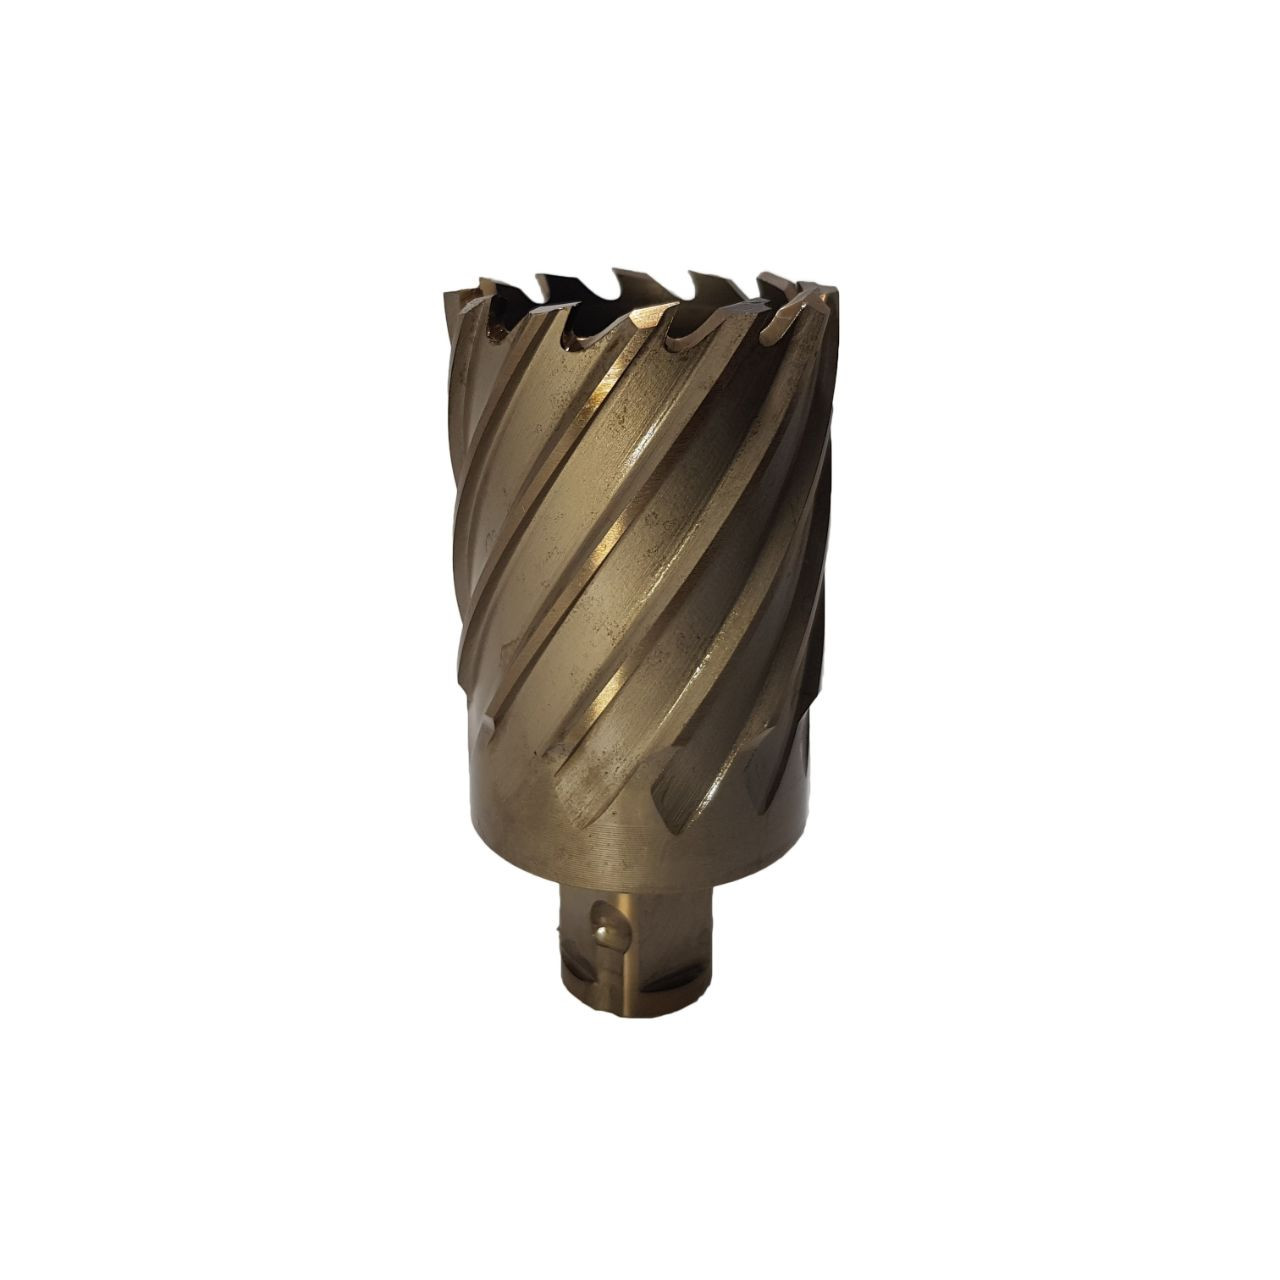 42 X 50 HSS Co Excision Core Drill